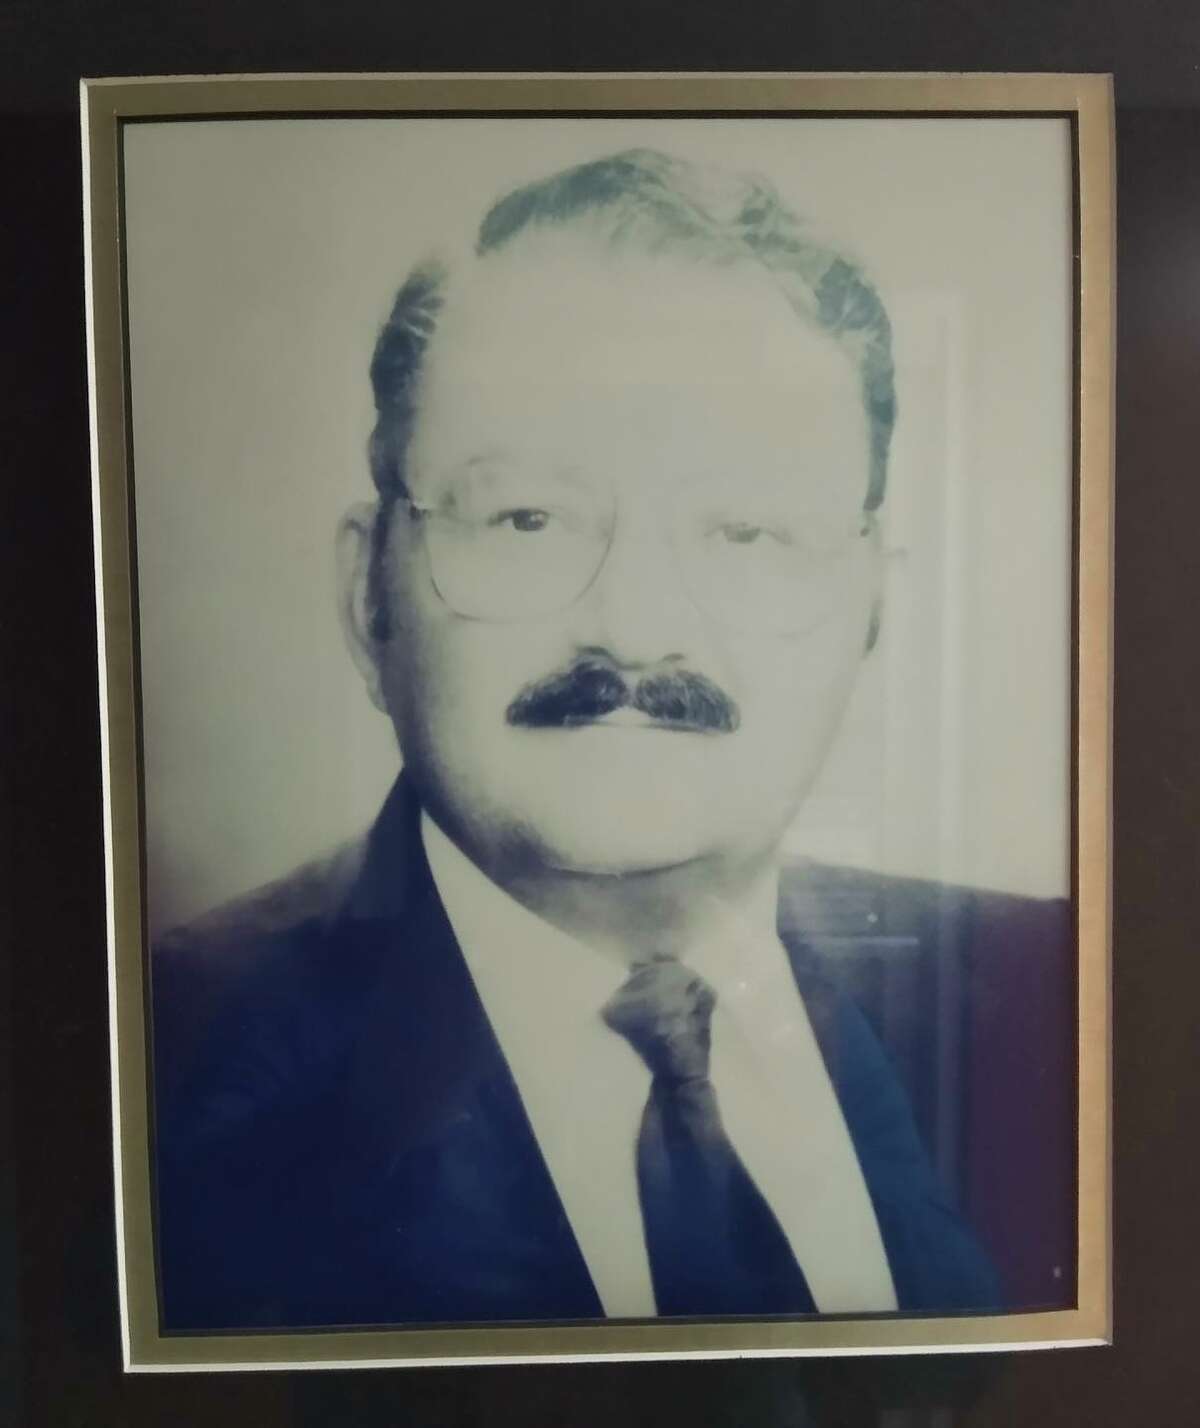 The Zapata County Sheriff's Office announced that former Sheriff Romeo R. Ramirez died on Tuesday, March 14, 2023. He was 85 years old.